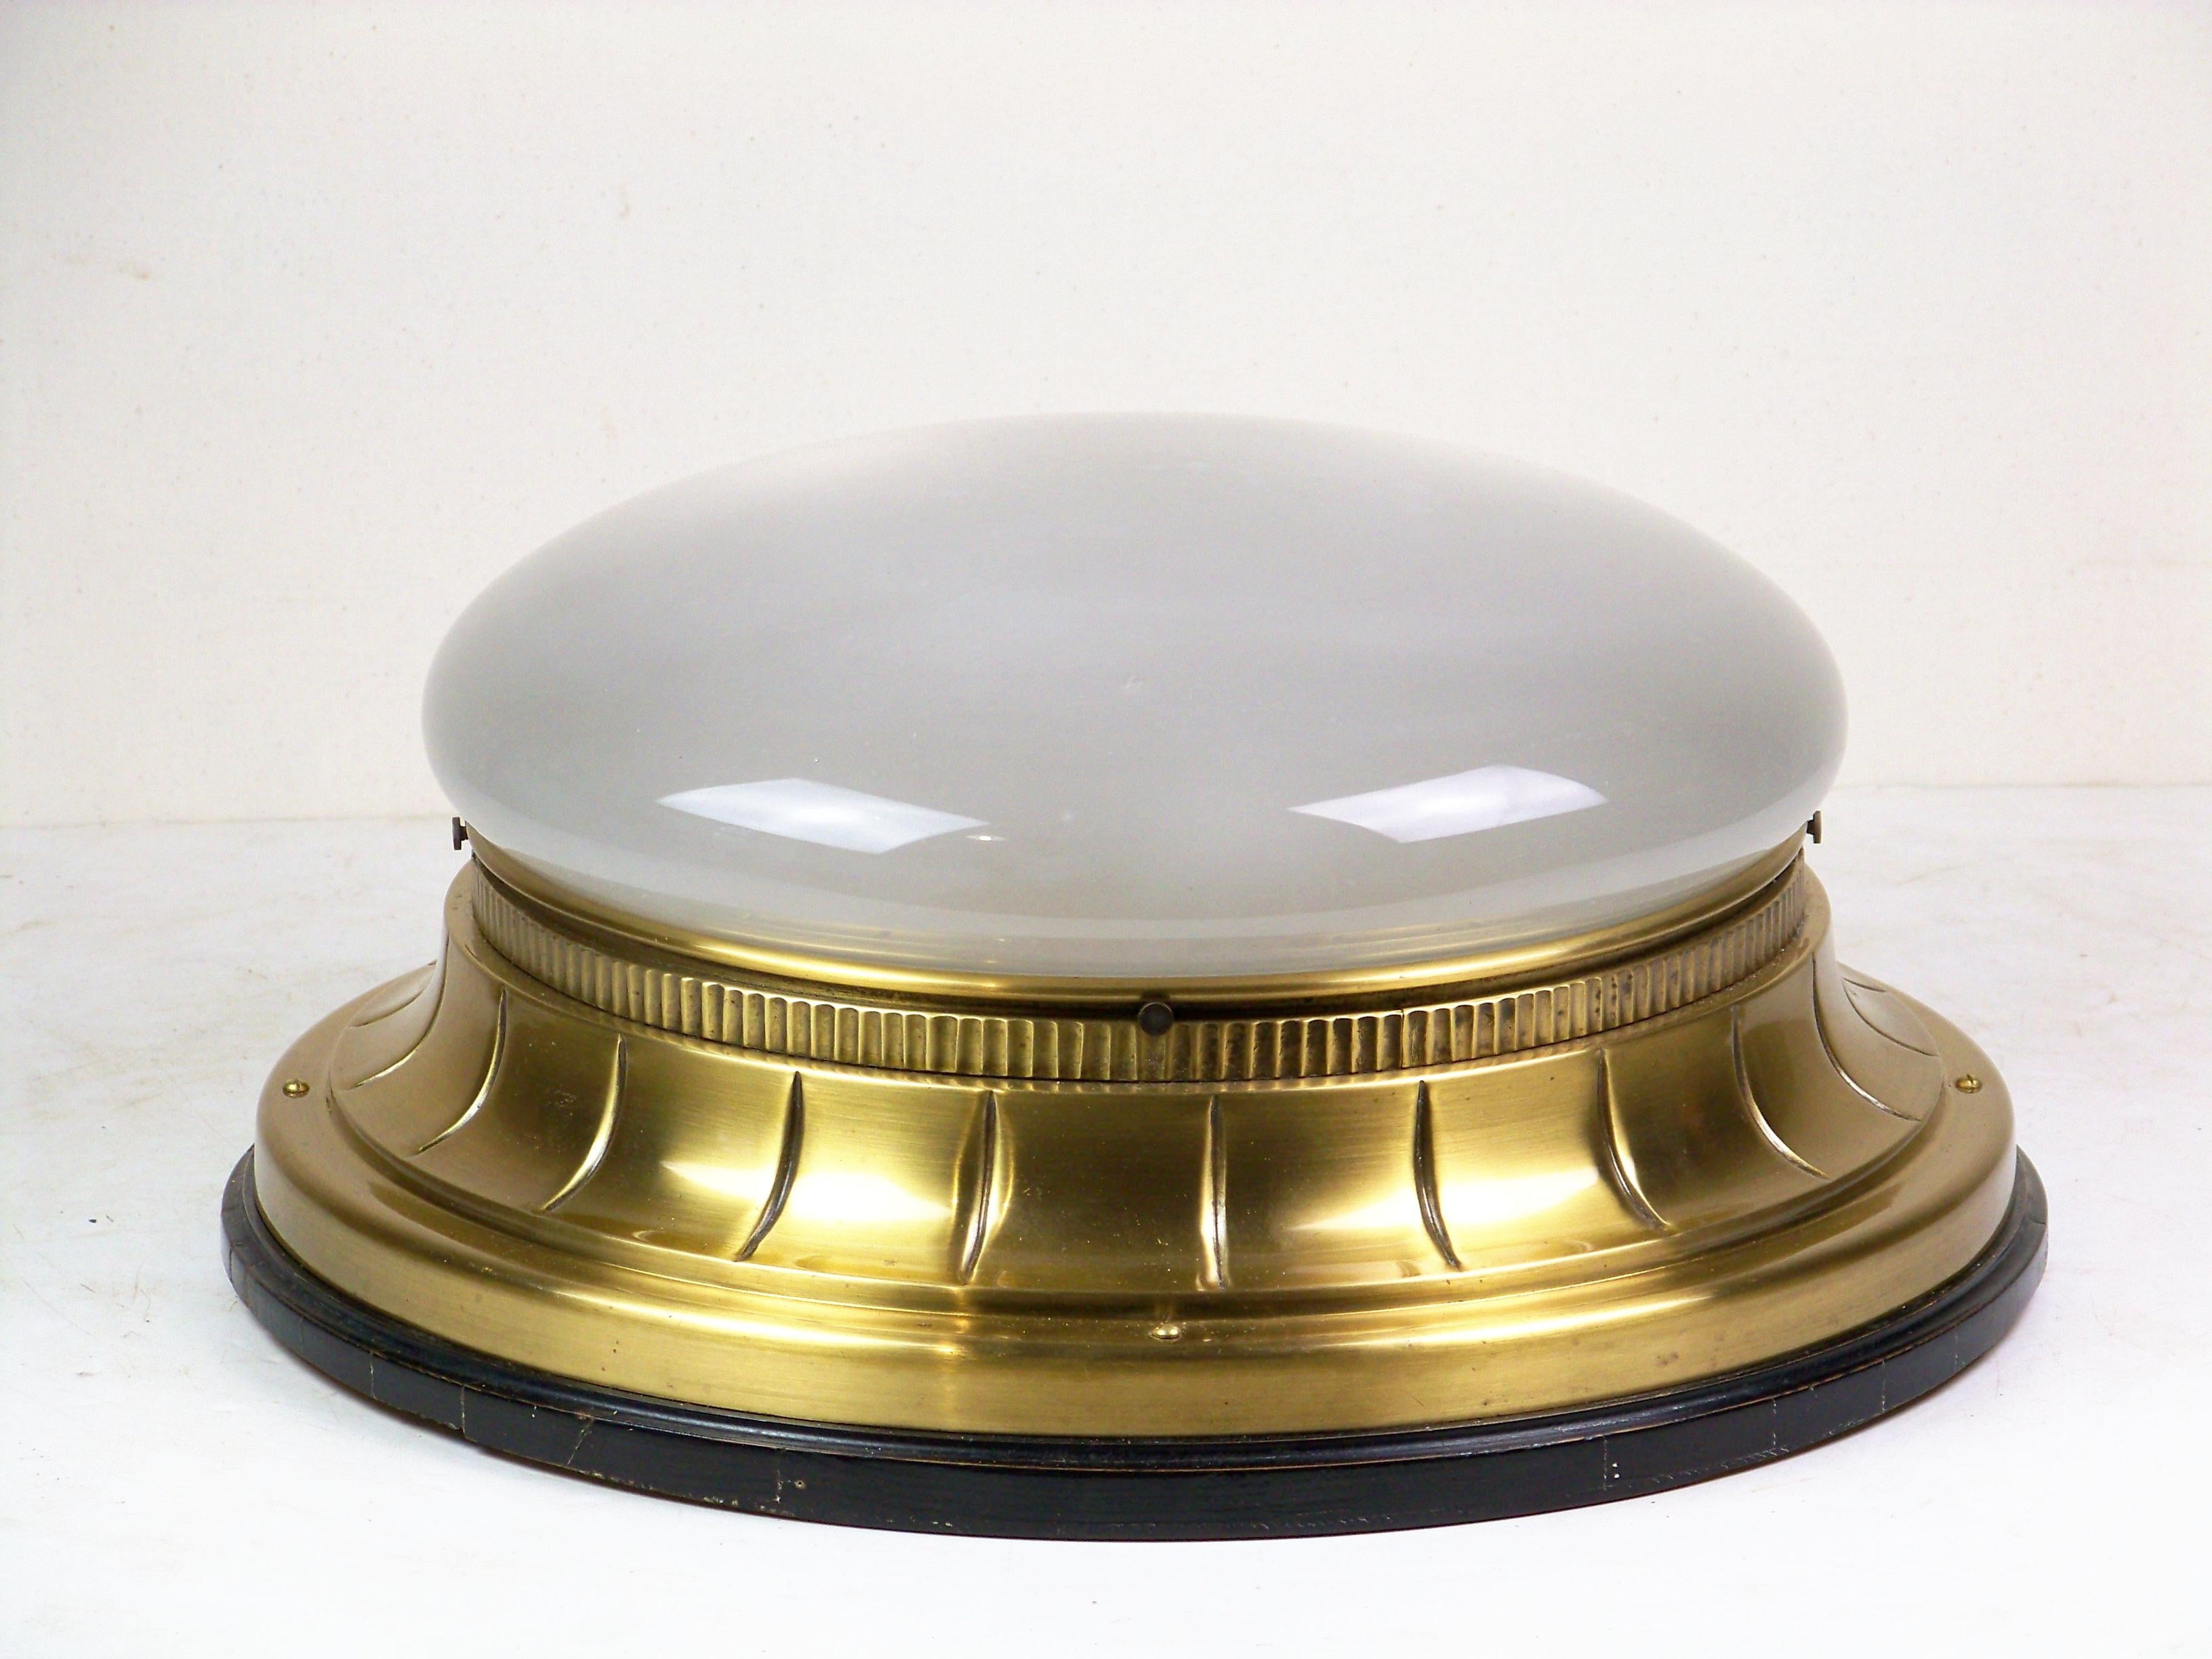 Fully functional in perfect original condition. Renovated surface treatment of the brass body (polished, provided with the appropriate varnish), the wooden part perfectly cleaned and polished. The wooden base was installed in the vault, its shape